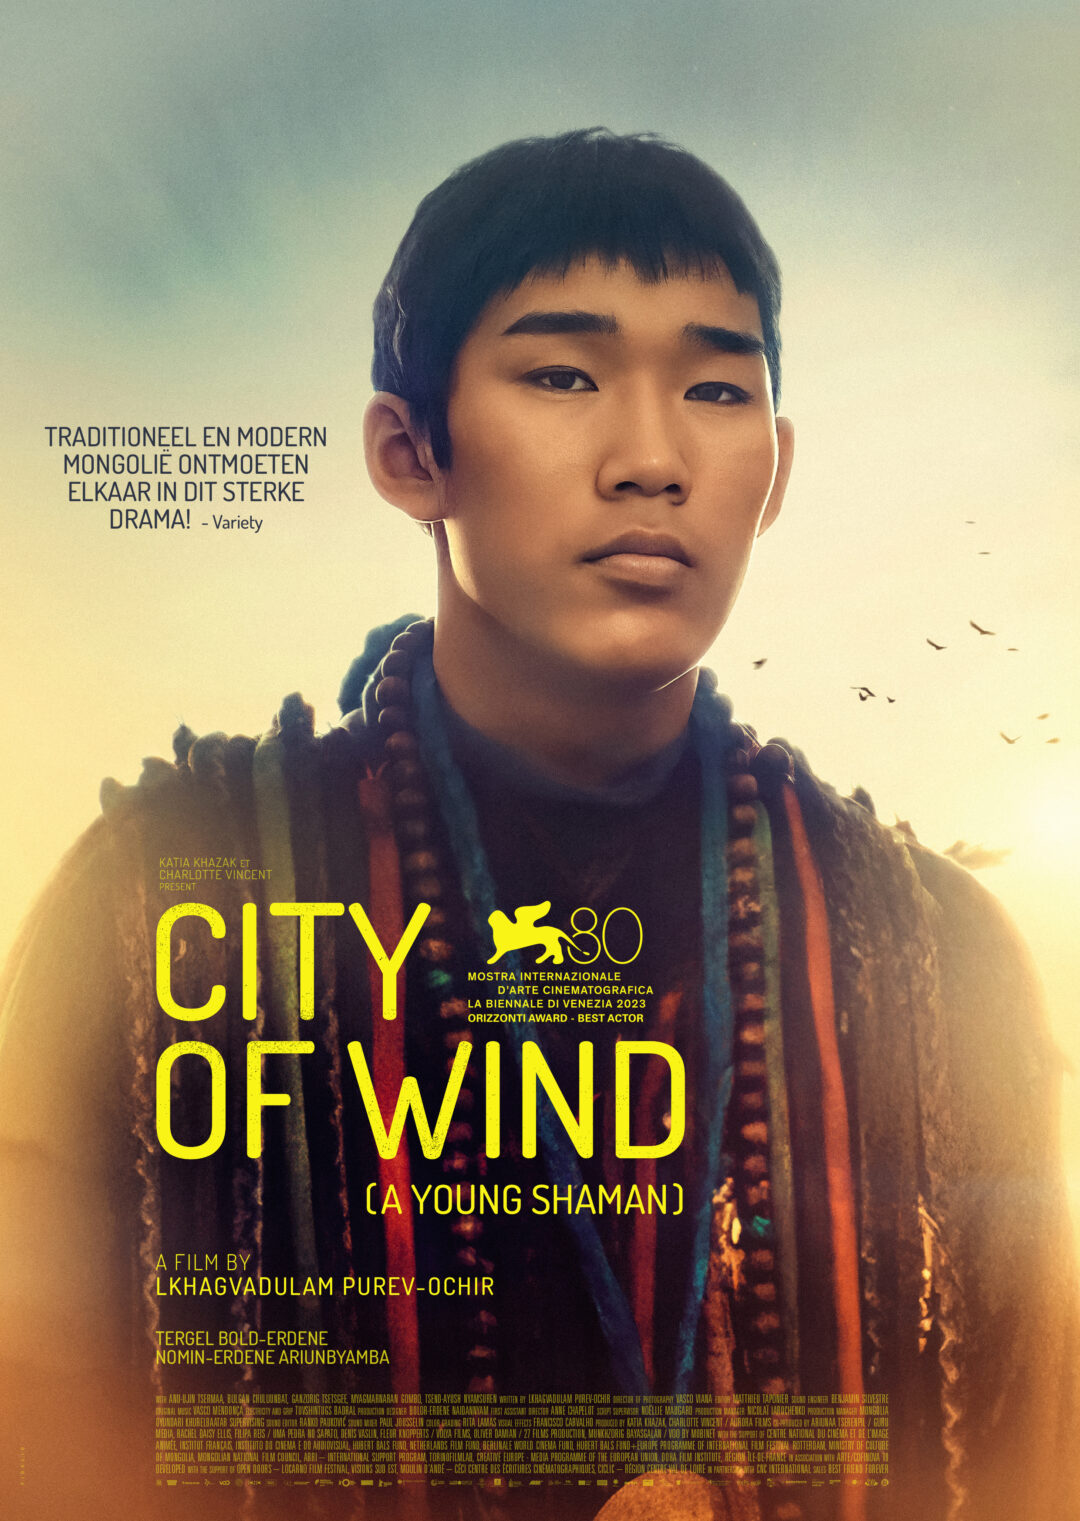 City-of-Wind-A-Young-Shaman-_ps_1_jpg_sd-high.jpg